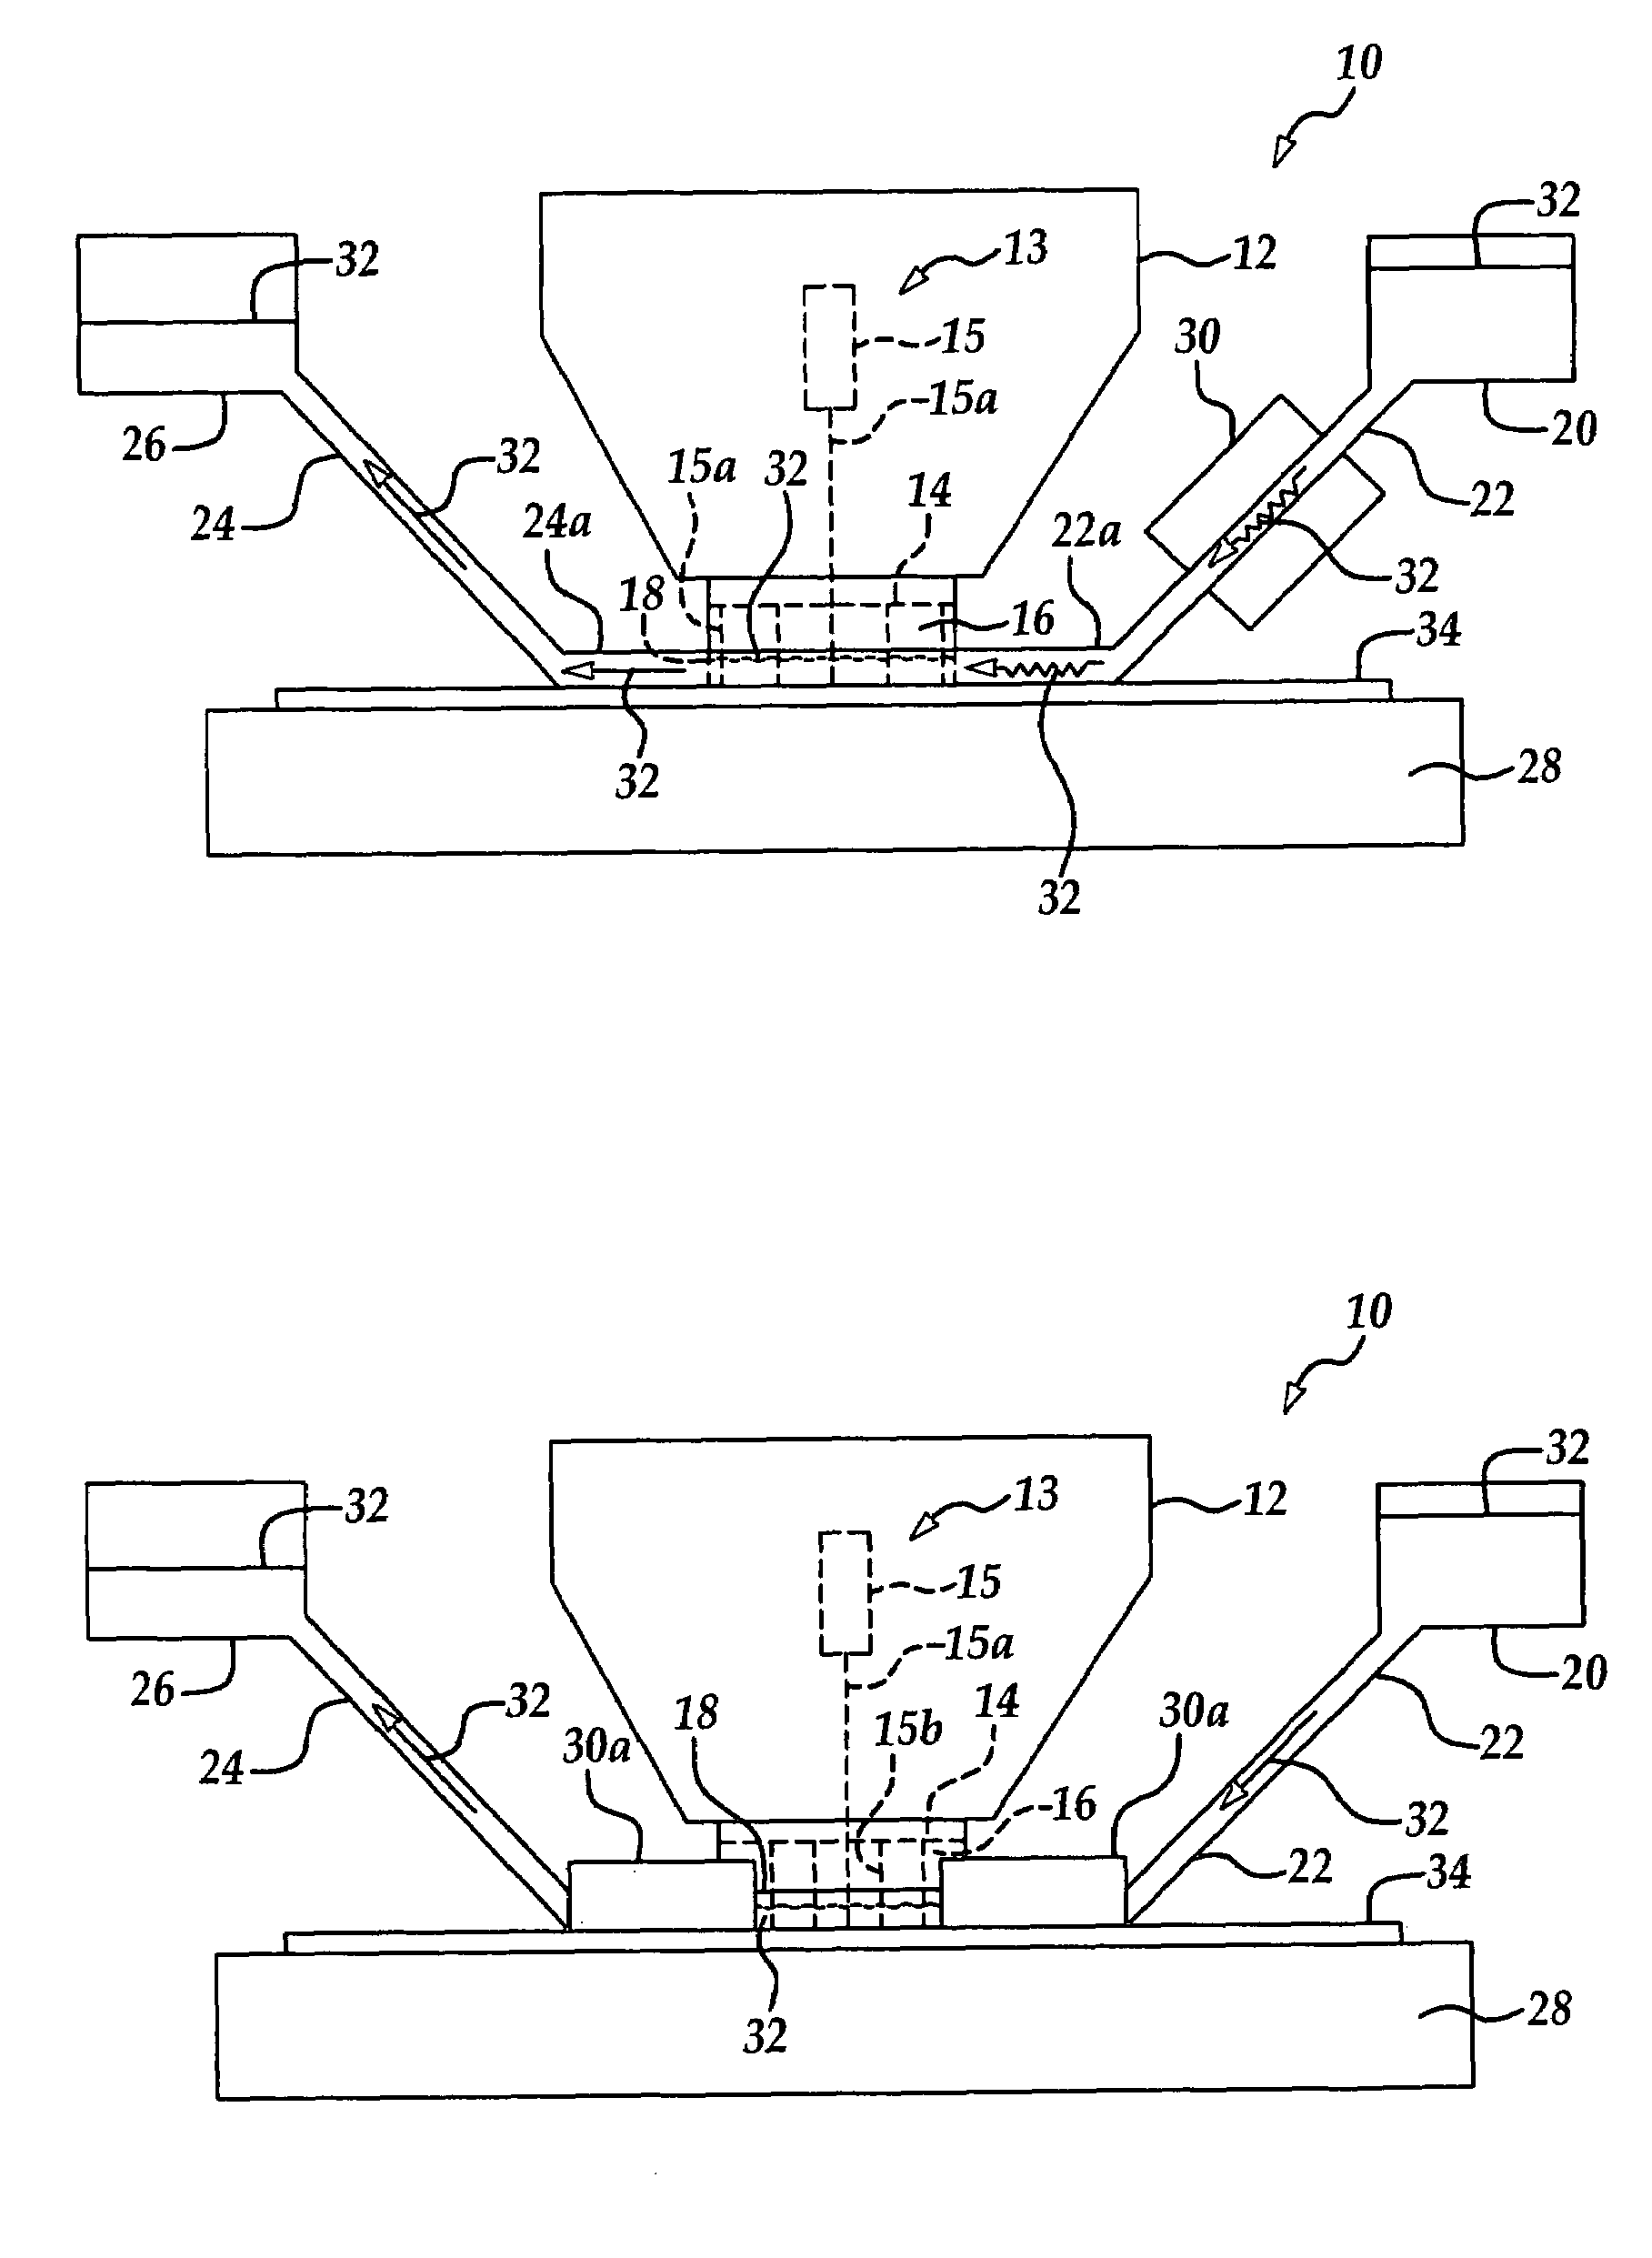 Megasonic immersion lithography exposure apparatus and method